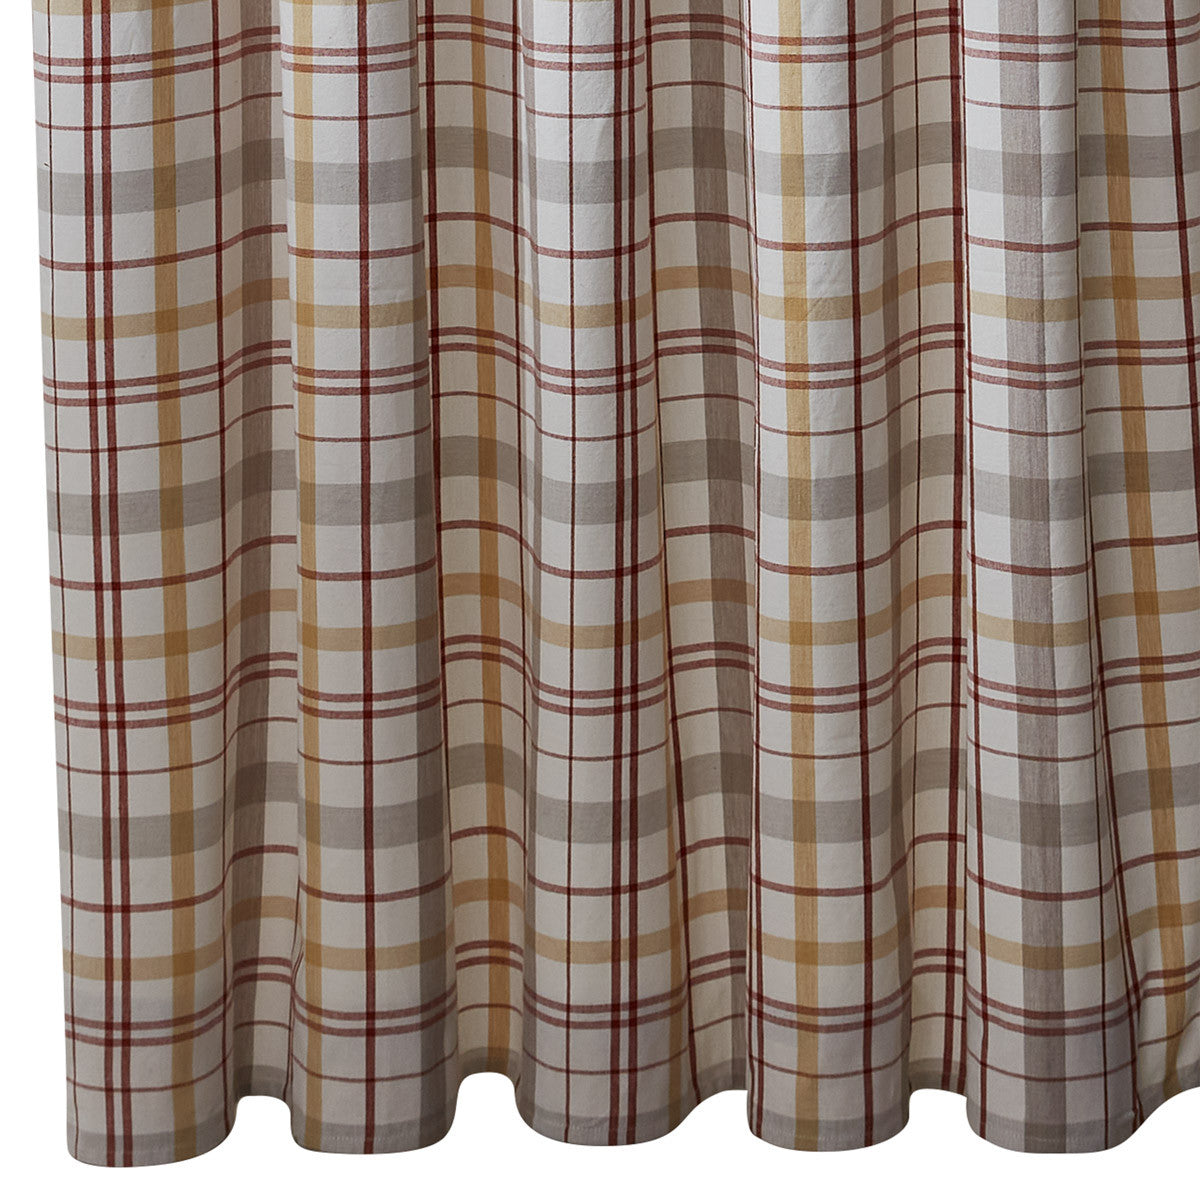 Kingswood Shower Curtain